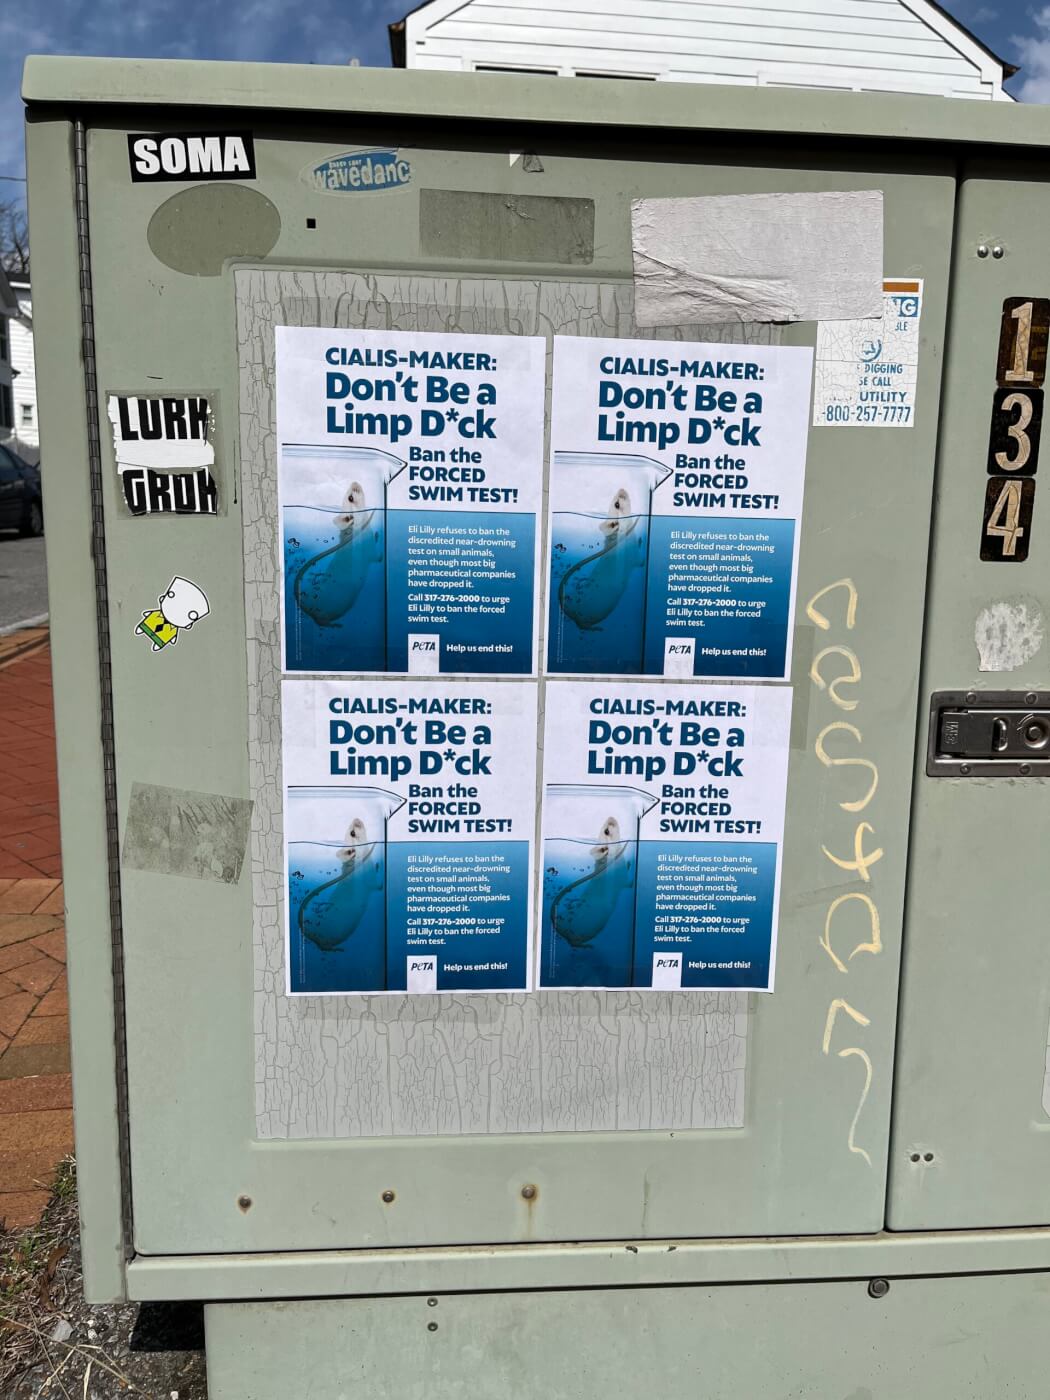 PETA unveiled a new graphic and plastered its provocative message—“Don’t Be a Limp D*ck”—across Eli Lilly Vice President Janine Morris’ neighborhood in Annapolis, Maryland